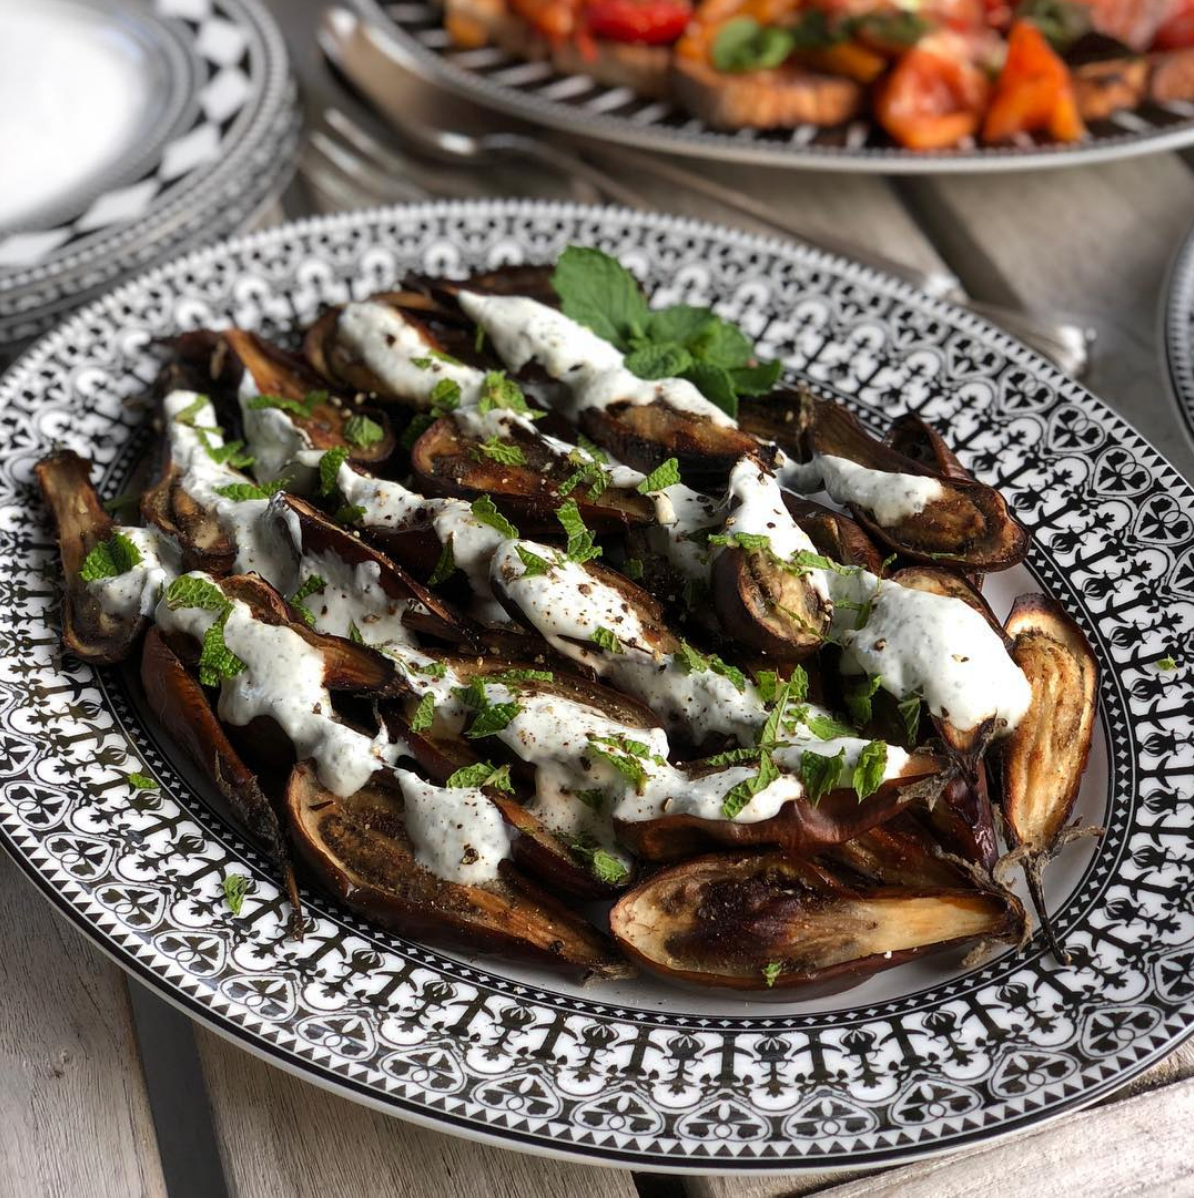 A decorative black and white Casablanca Oval Rimmed Platter from Caskata Artisanal Home with grilled eggplant drizzled with white sauce and garnished with chopped herbs.